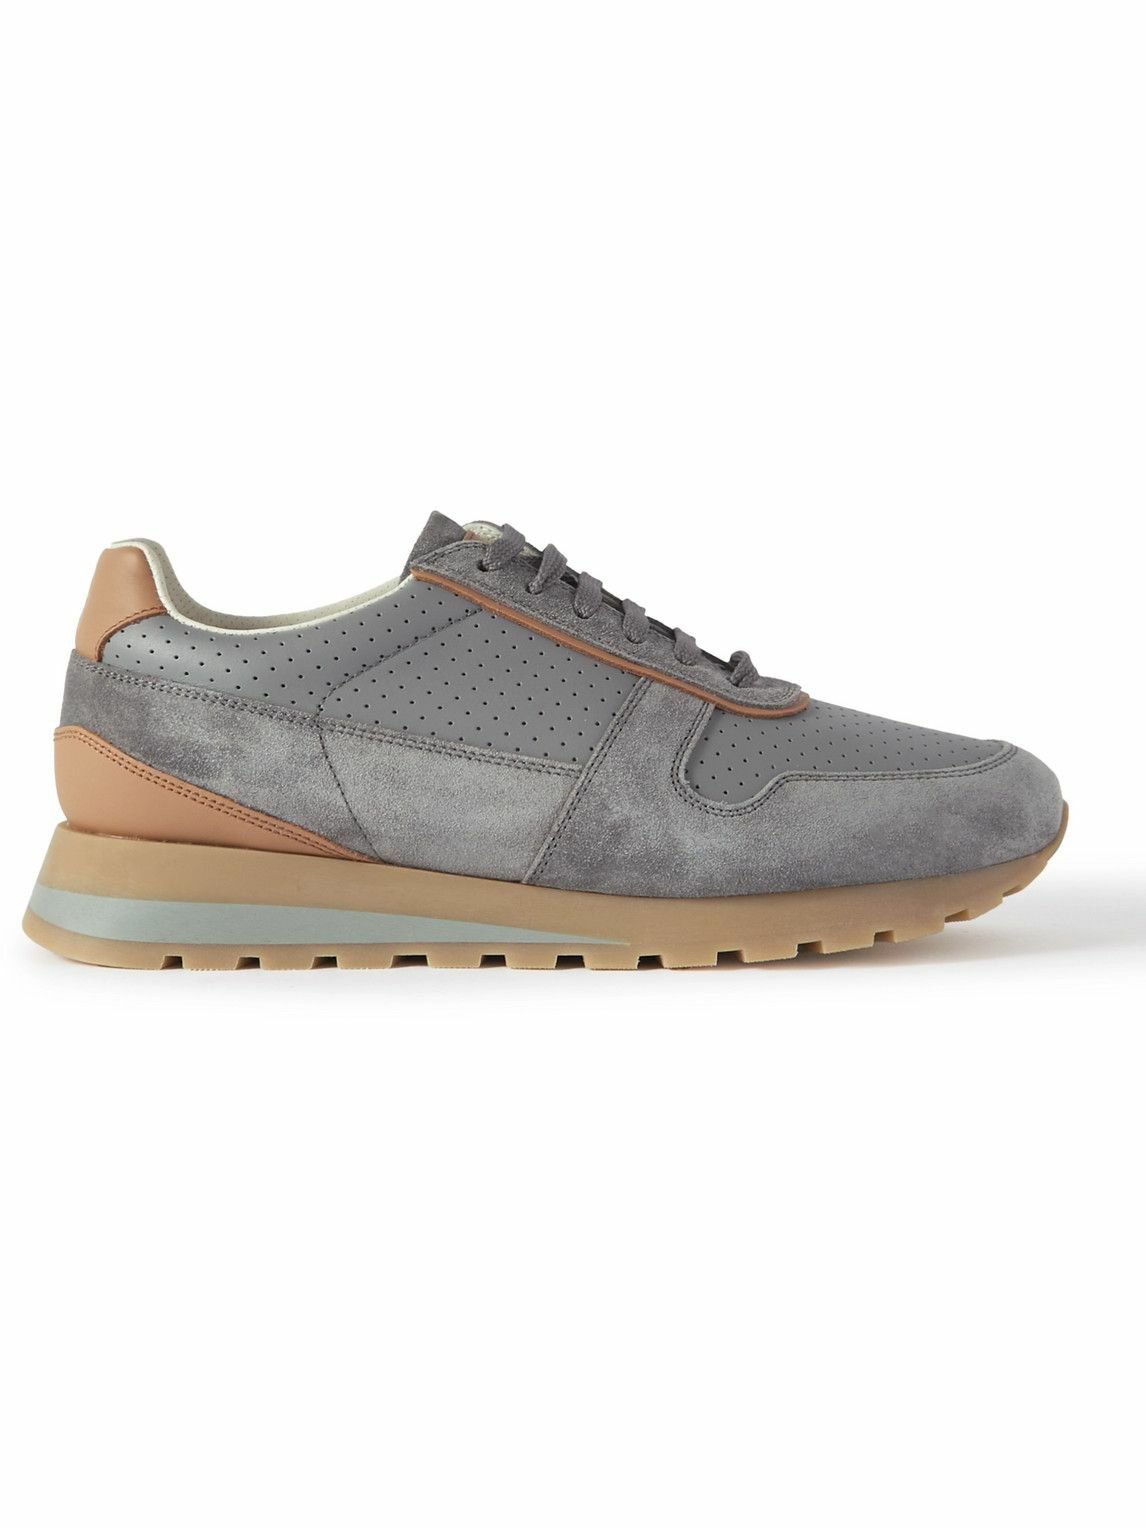 Brunello Cucinelli - Suede-Trimmed Perforated Leather Sneakers - Gray ...